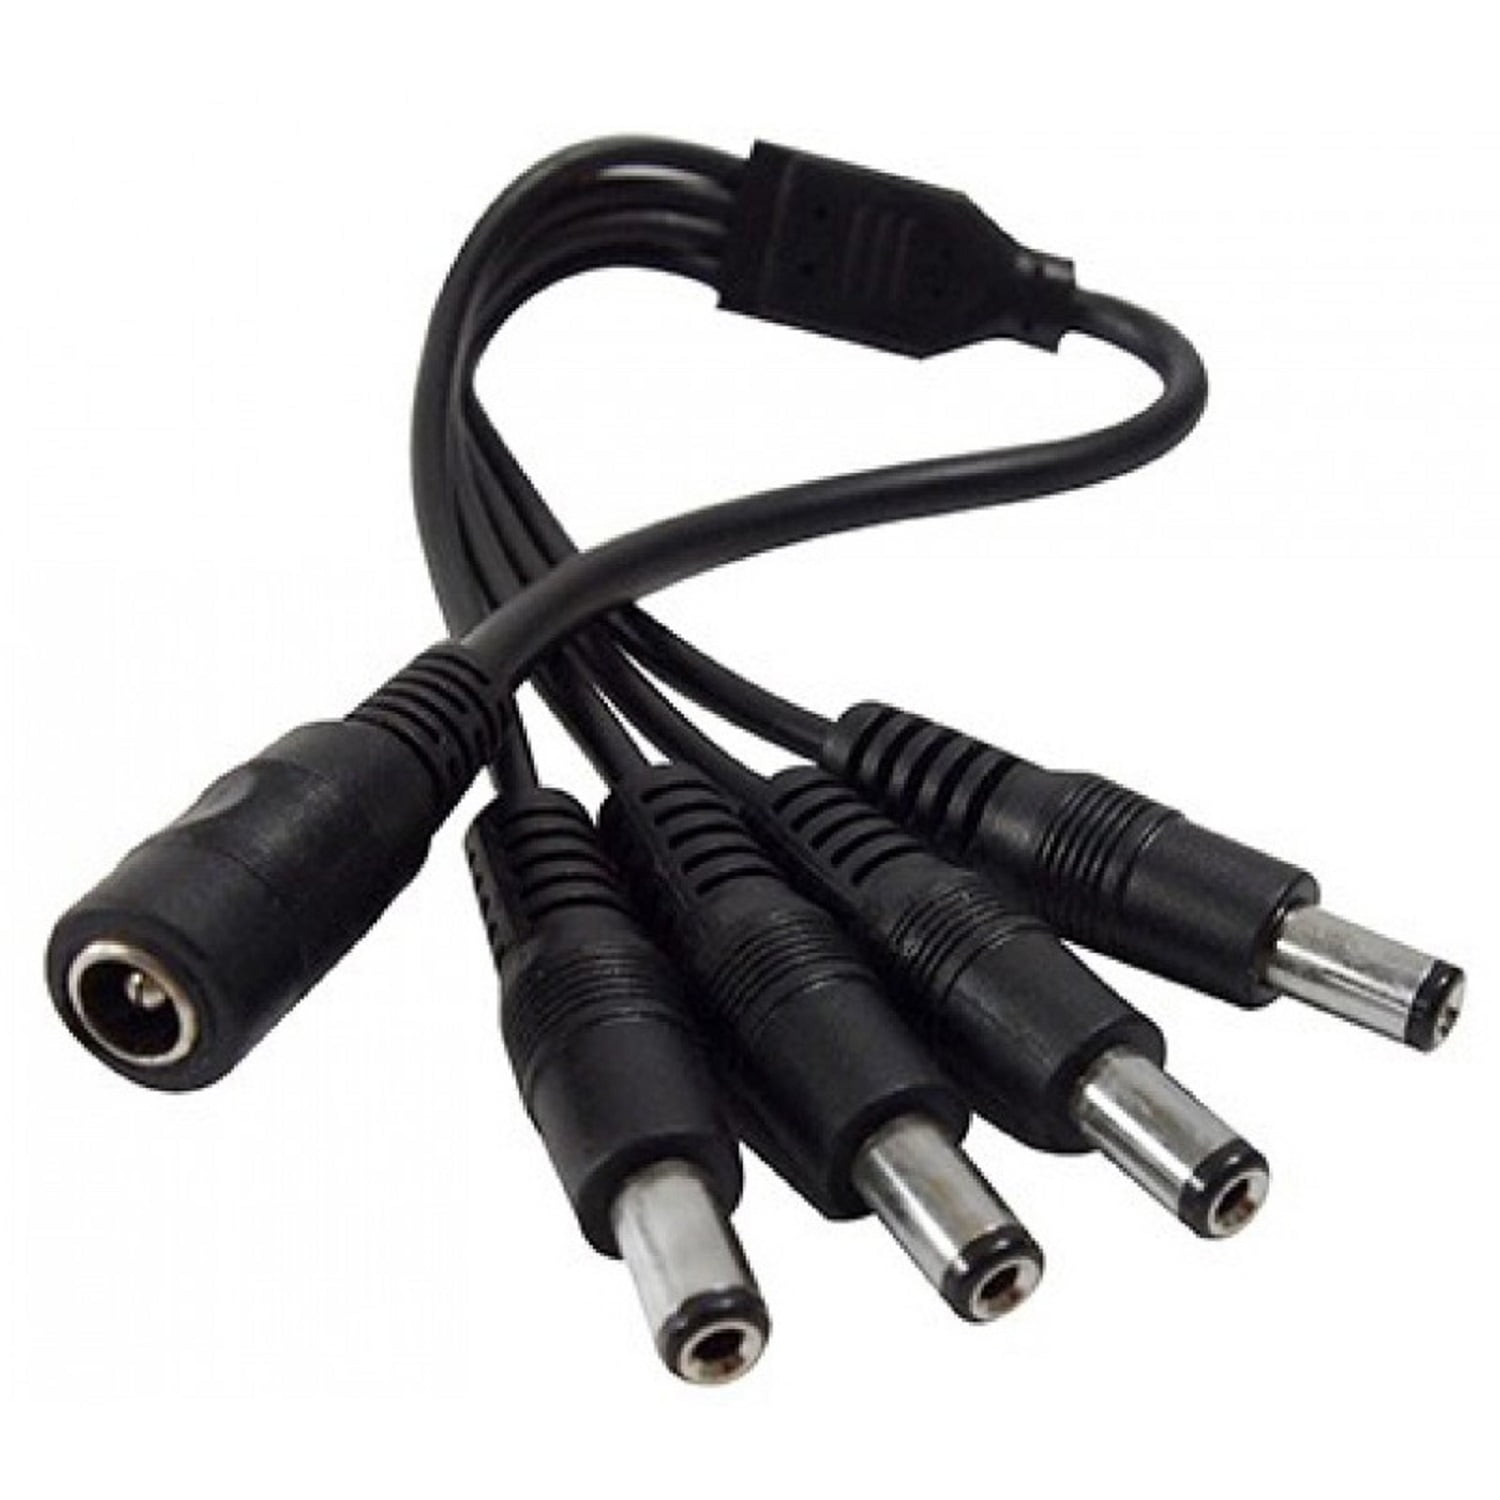 2 Pack CCTV 2-way Power Splitter Cable 1 Female To 2 Male 